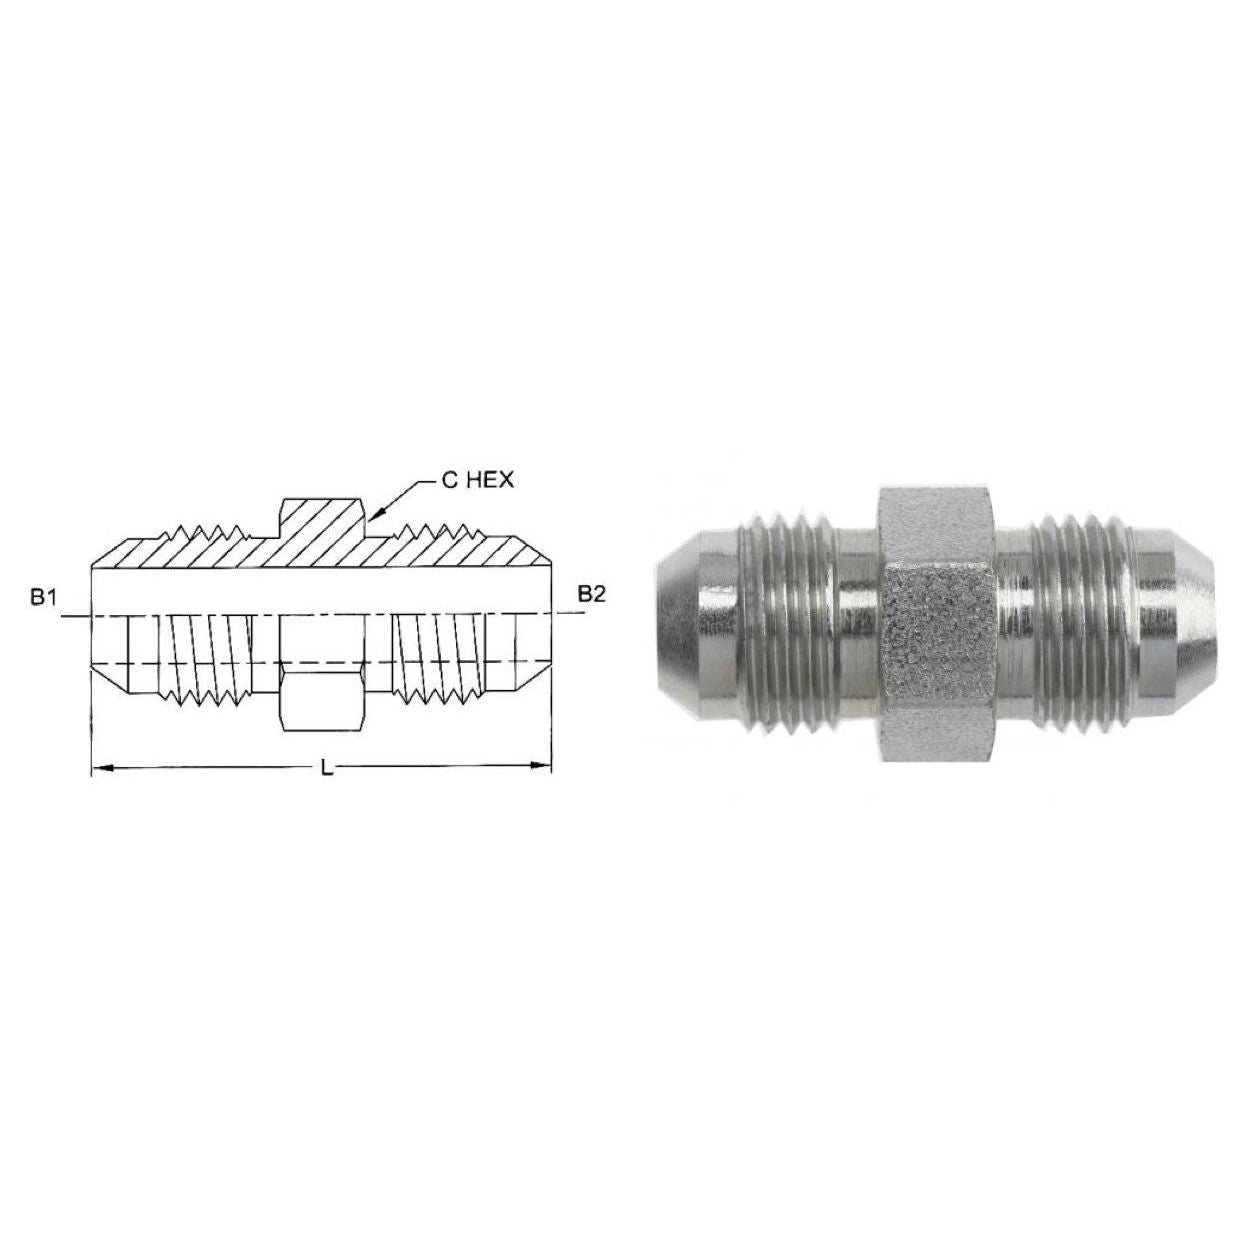 2403-10-04-SS : OneHydraulics Adapter, Straight, 0.625 (5/8") Male JIC x 0.25 (1/4") Male, Stainless Steel, 6000psi